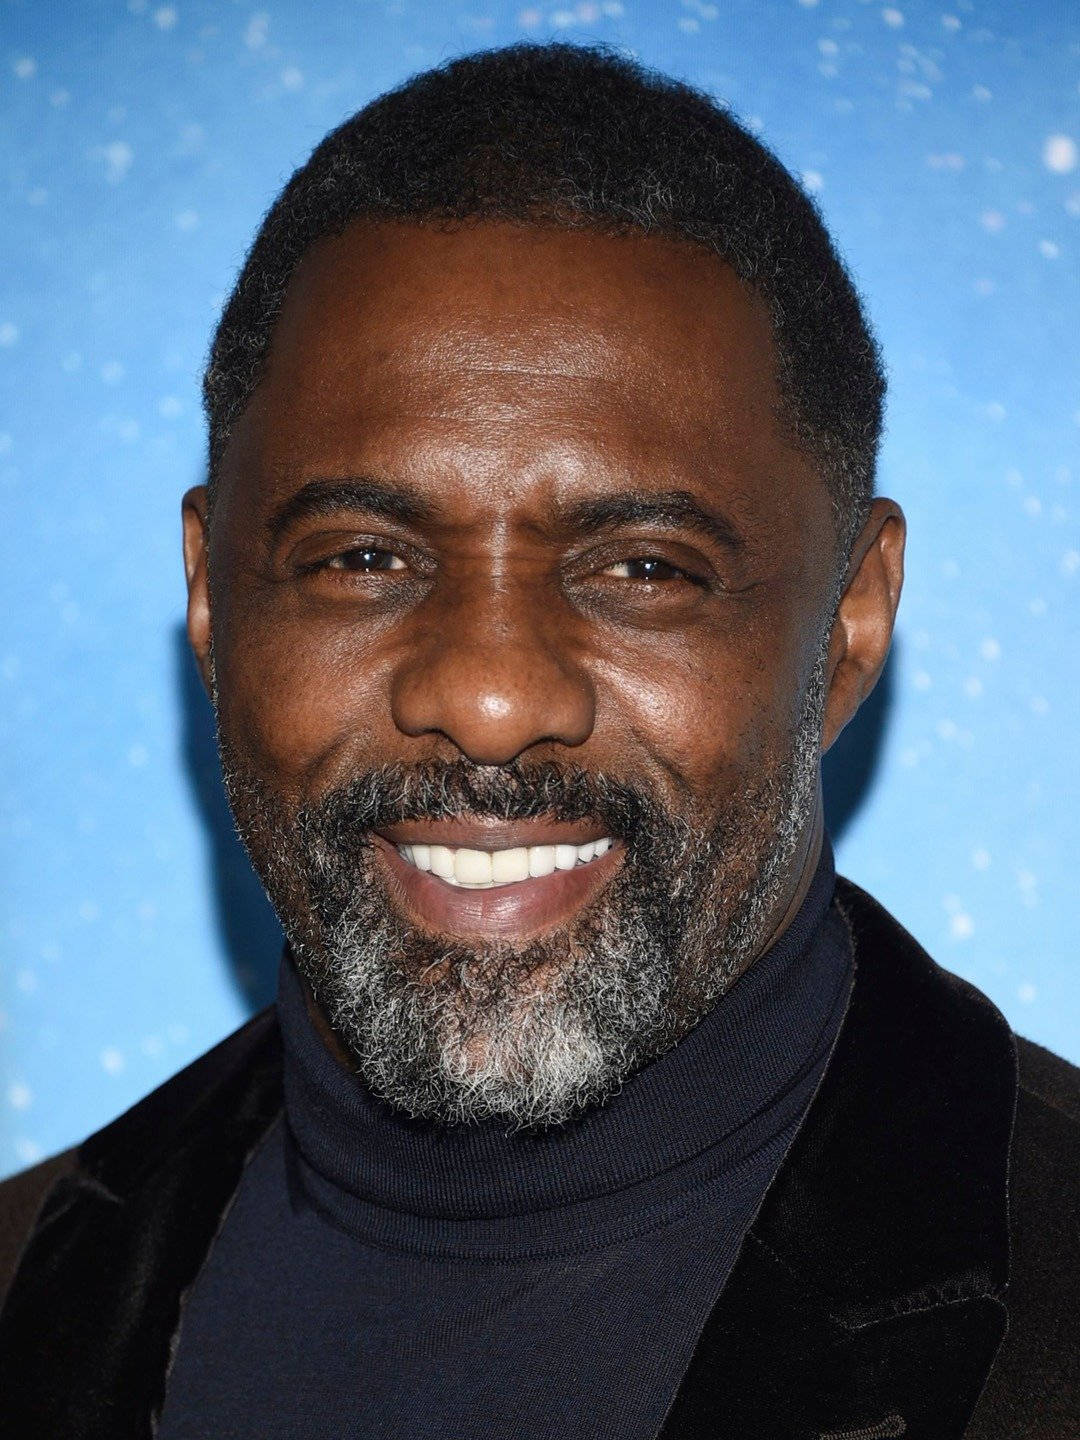 Idris Elba Against Blue With Snow-like Graphics Wallpaper